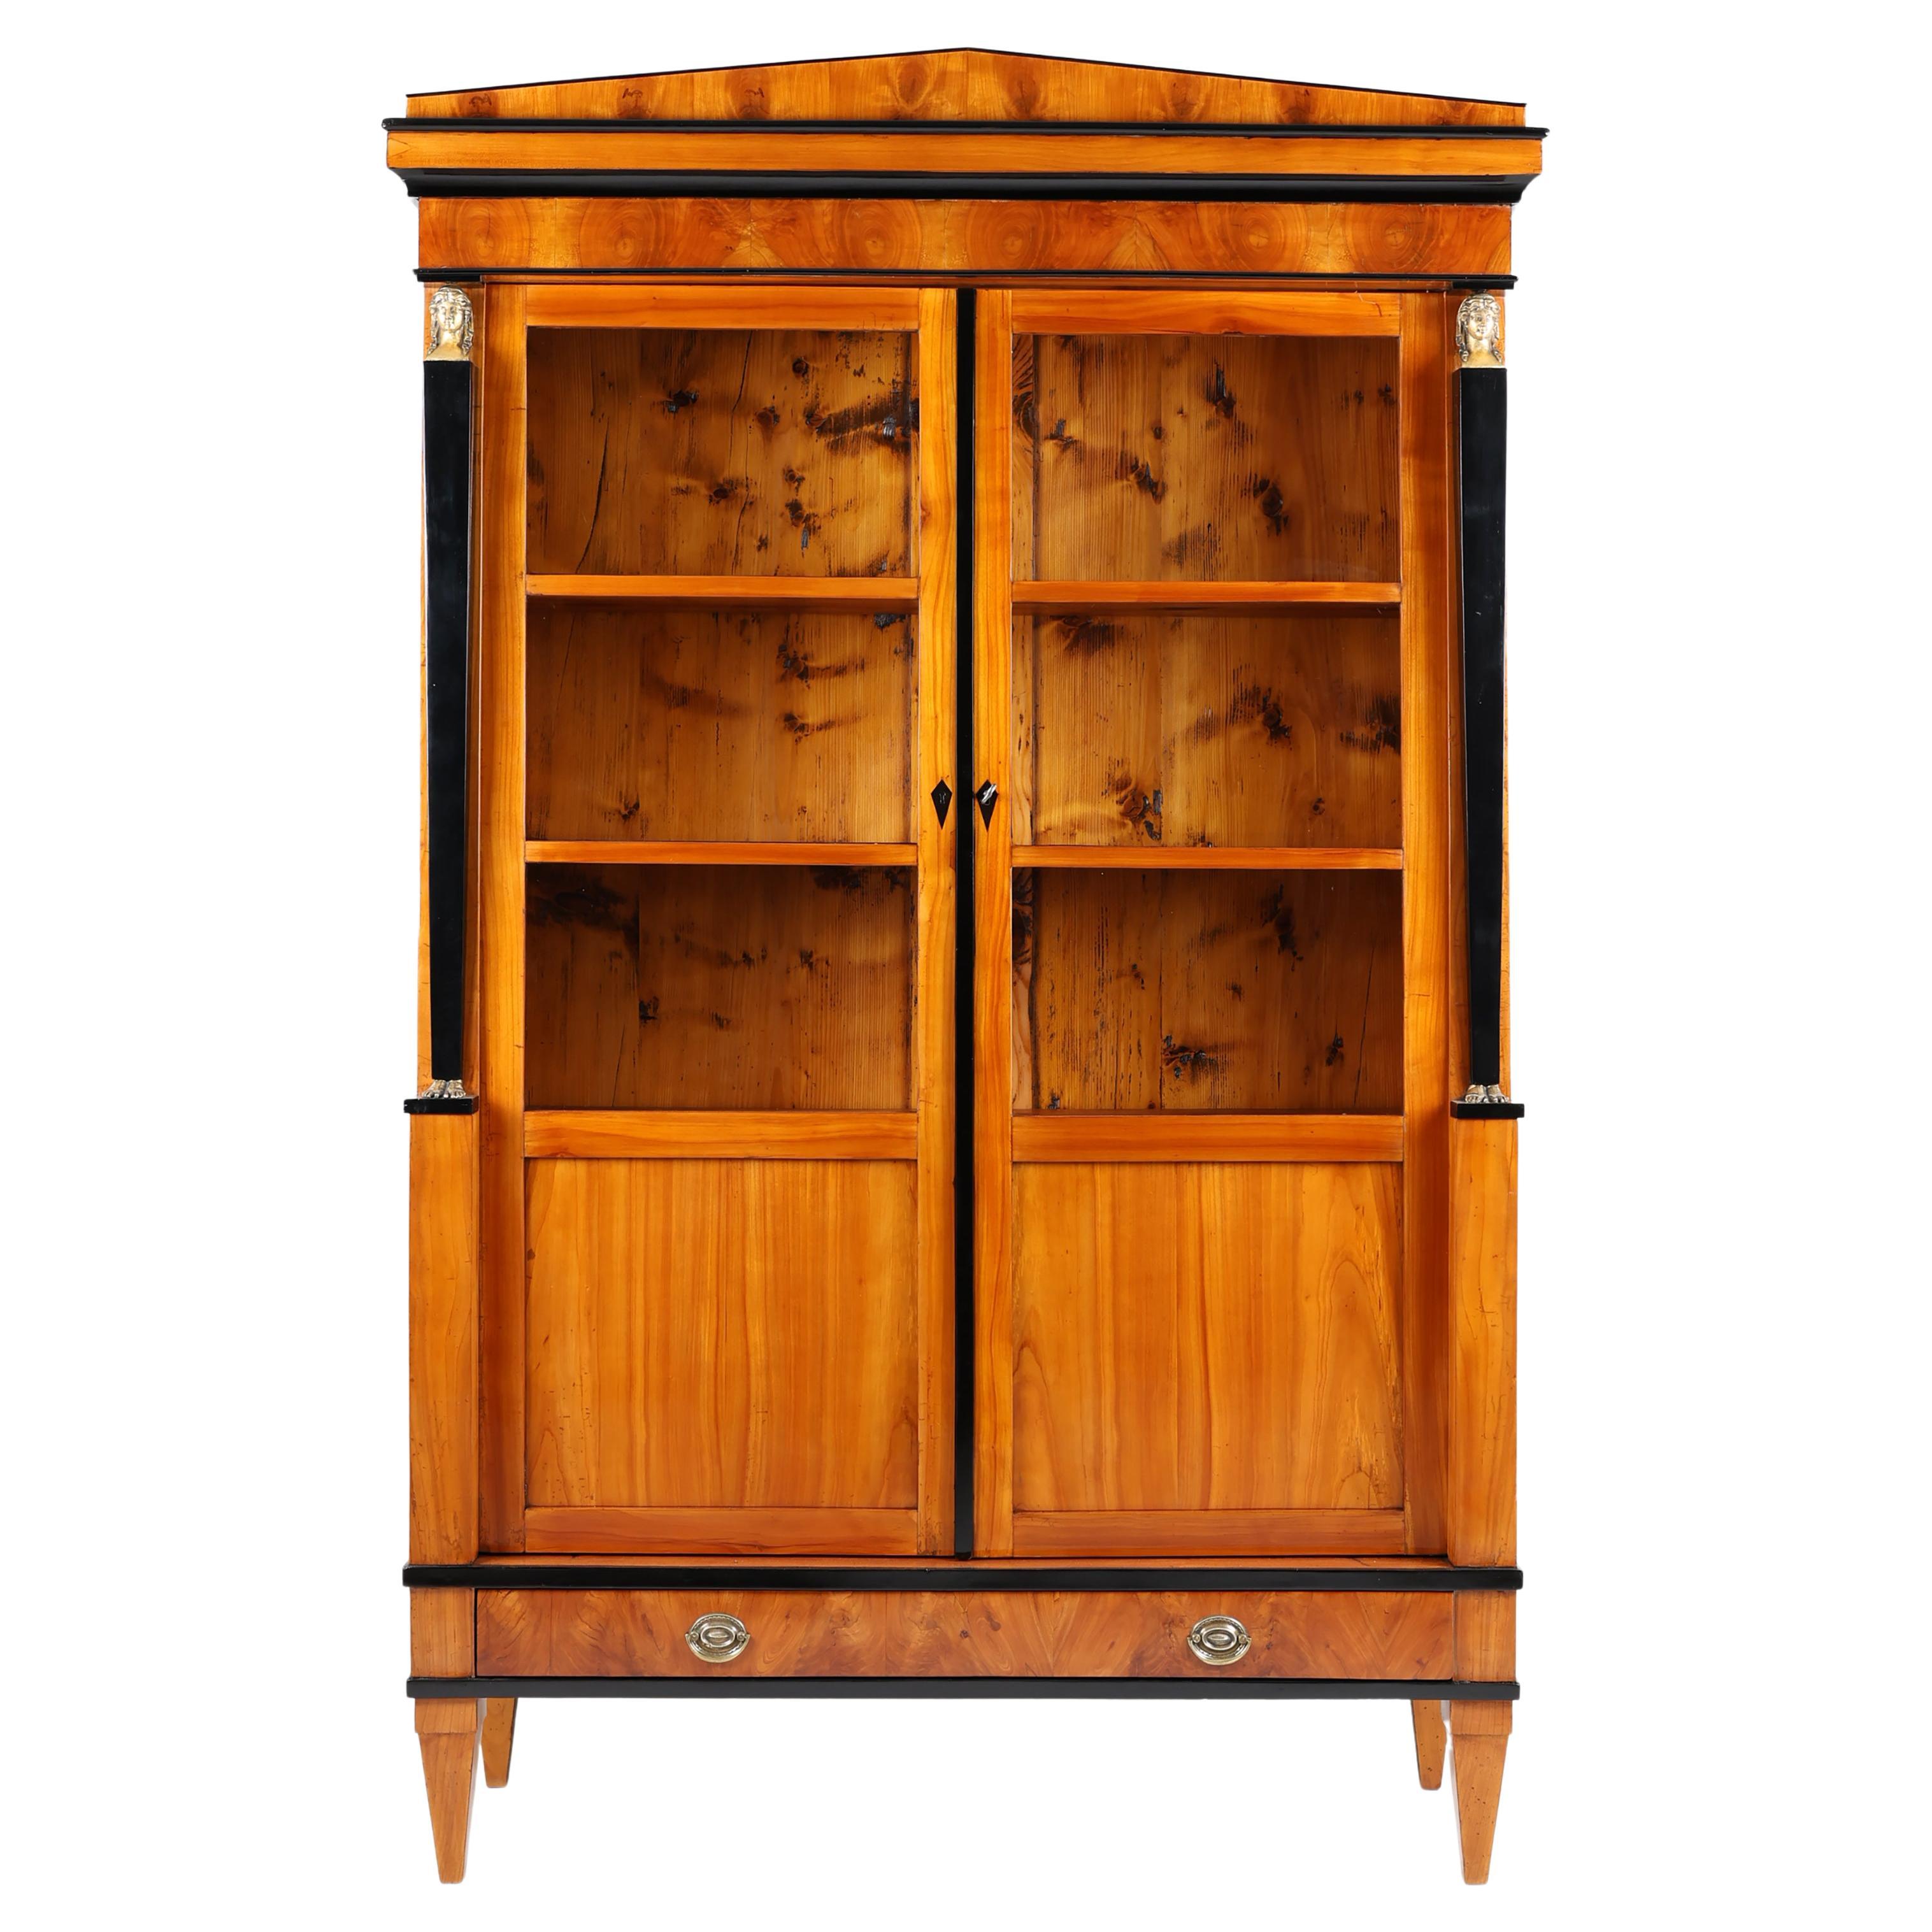 Early 19th Century Biedermeier Vitrine
South Germany, 1820-1825

Standing on conical feet Biedermeier Vitrine with two doors. Each door with four fields, three of them with glass. This antique Vitrine is veneered with cherry wood with very nice